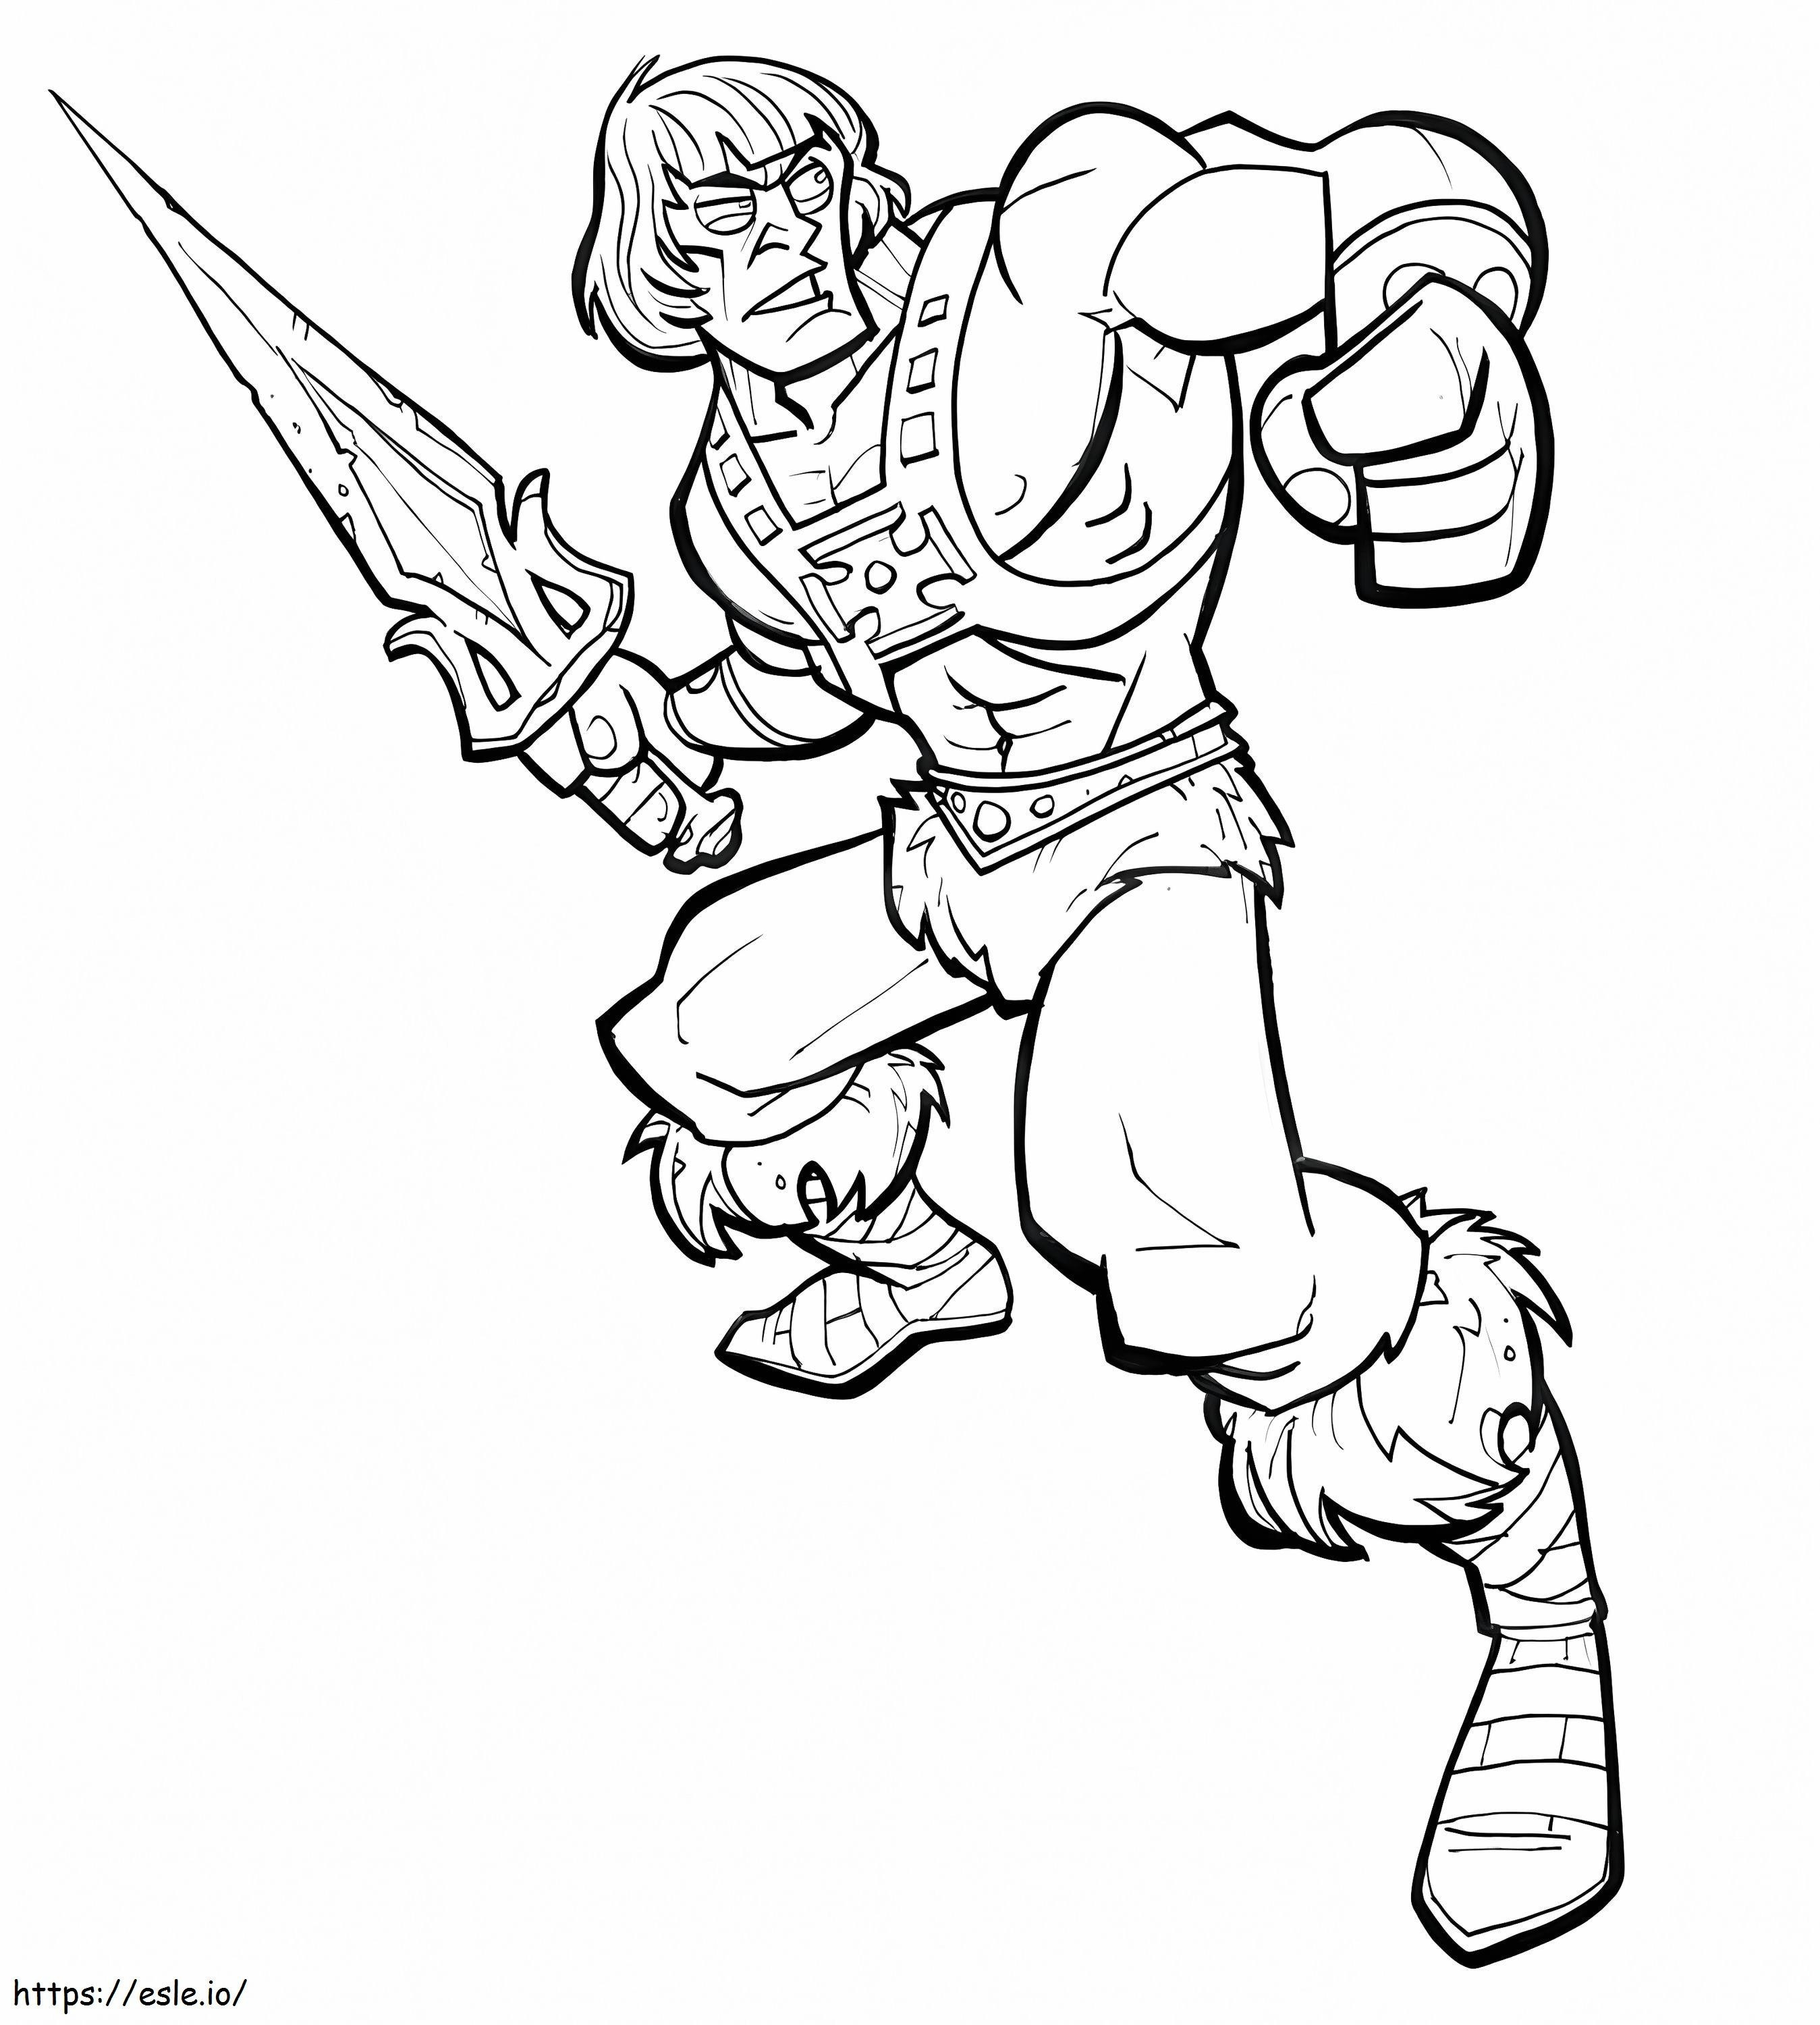 He Man 2 coloring page